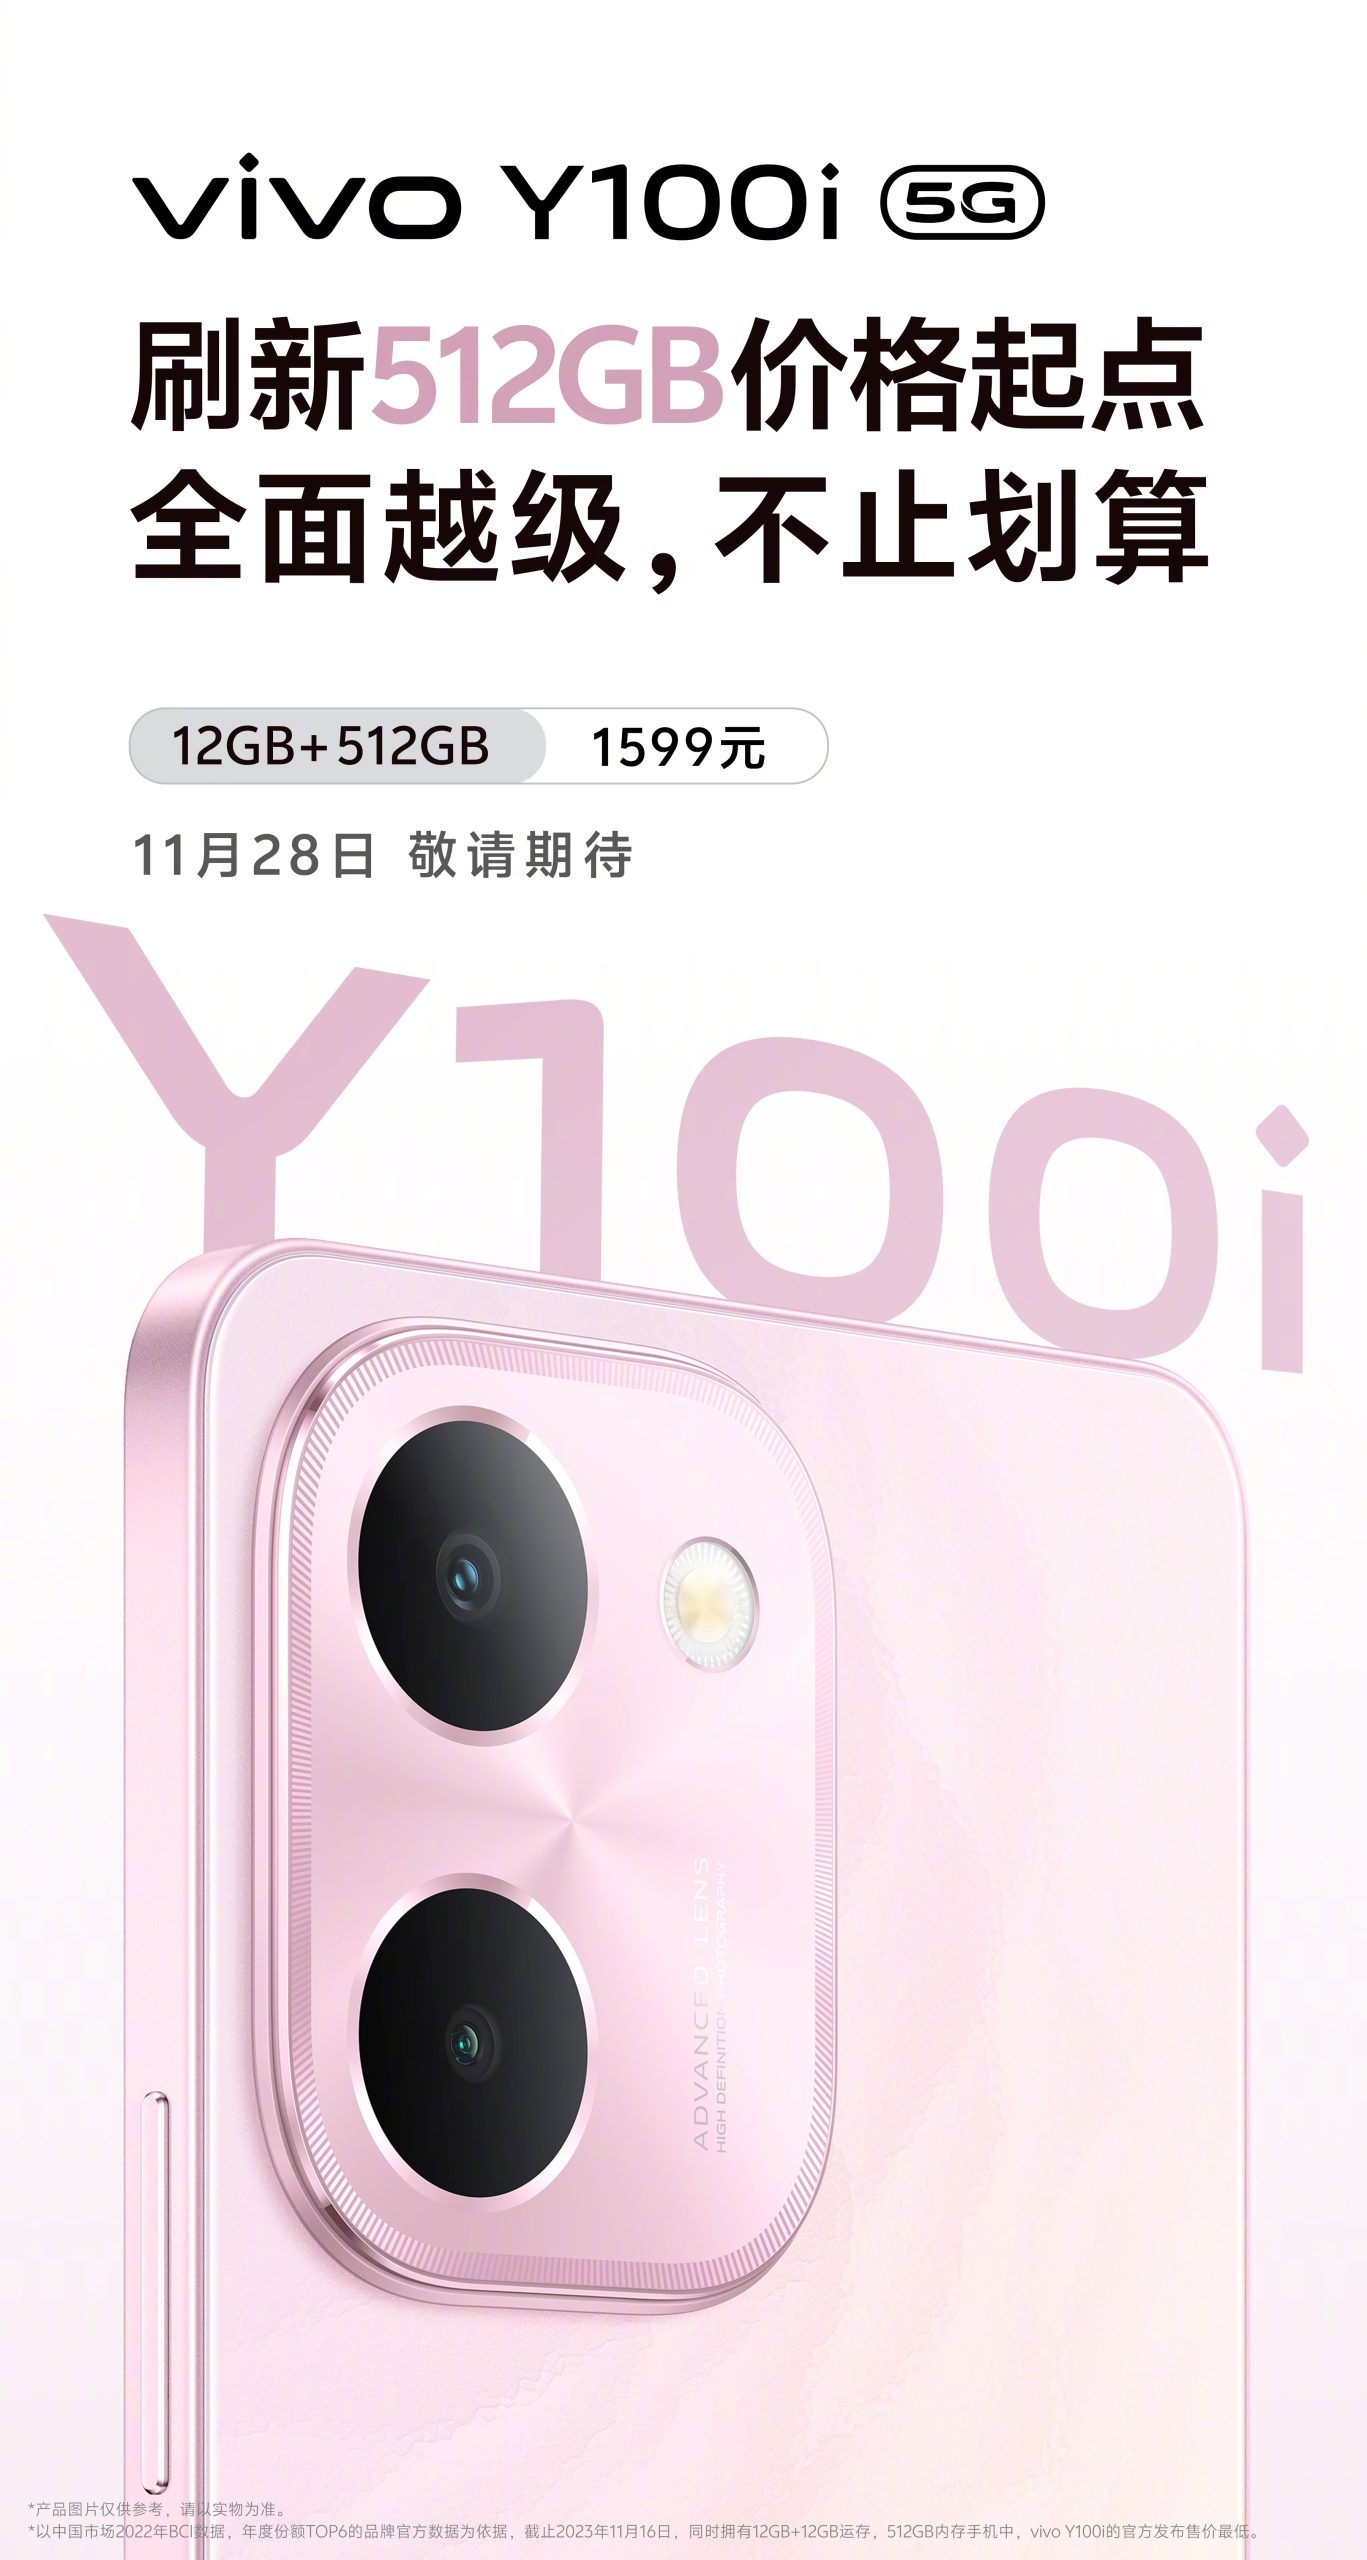 Vivo Y100i 5G launched